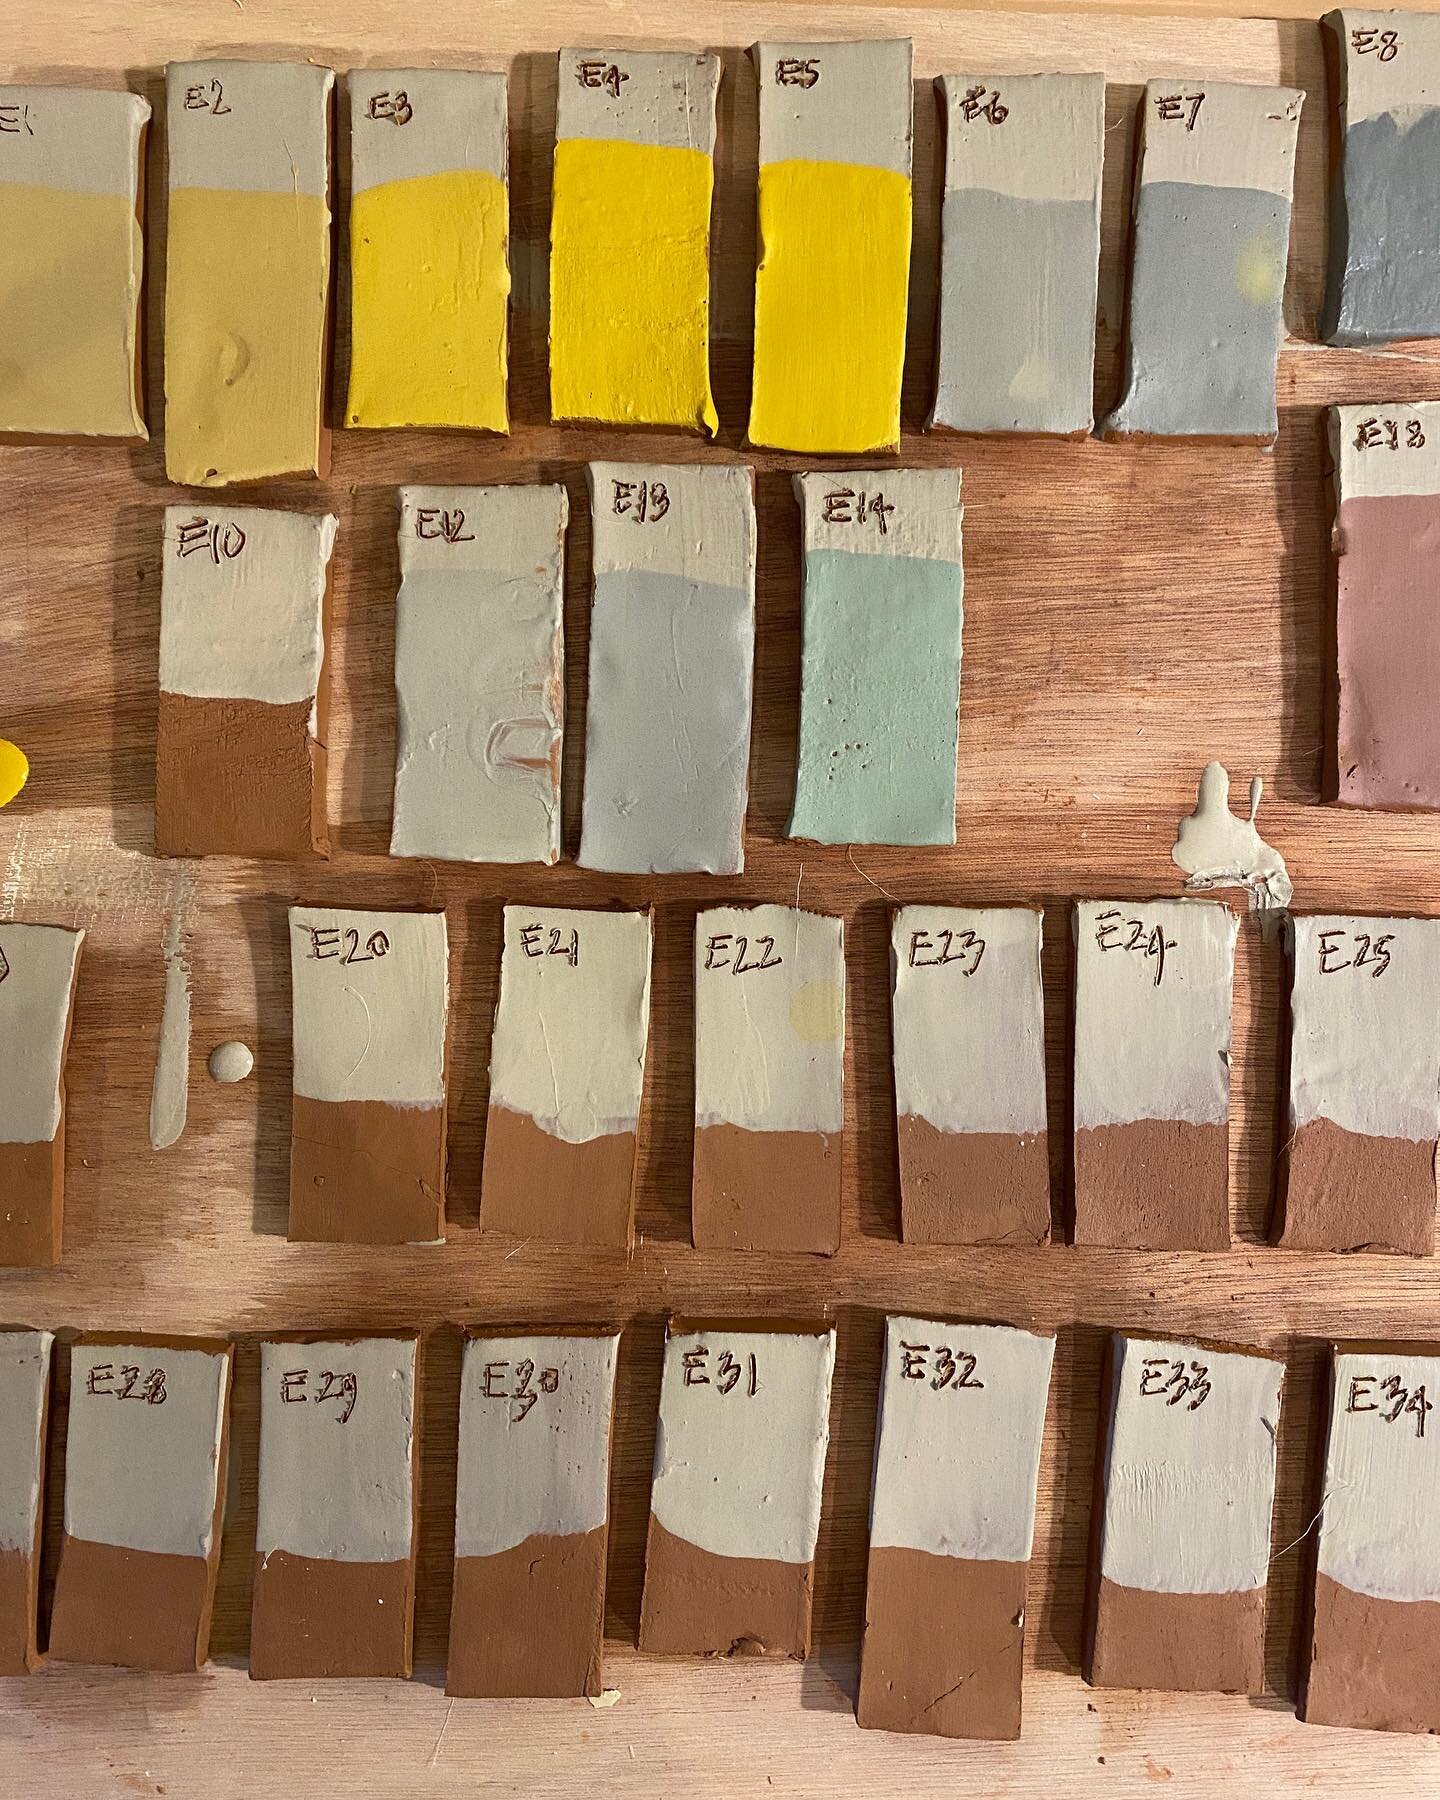 Every step of making feels like a picture perfect moment&hellip;

These test tiles are traditional colours inspired from old French pots, with ochre yellows, yellow iron oxides, copper oxide, black iron oxides and a packet of &lsquo;leaf green&rsquo;